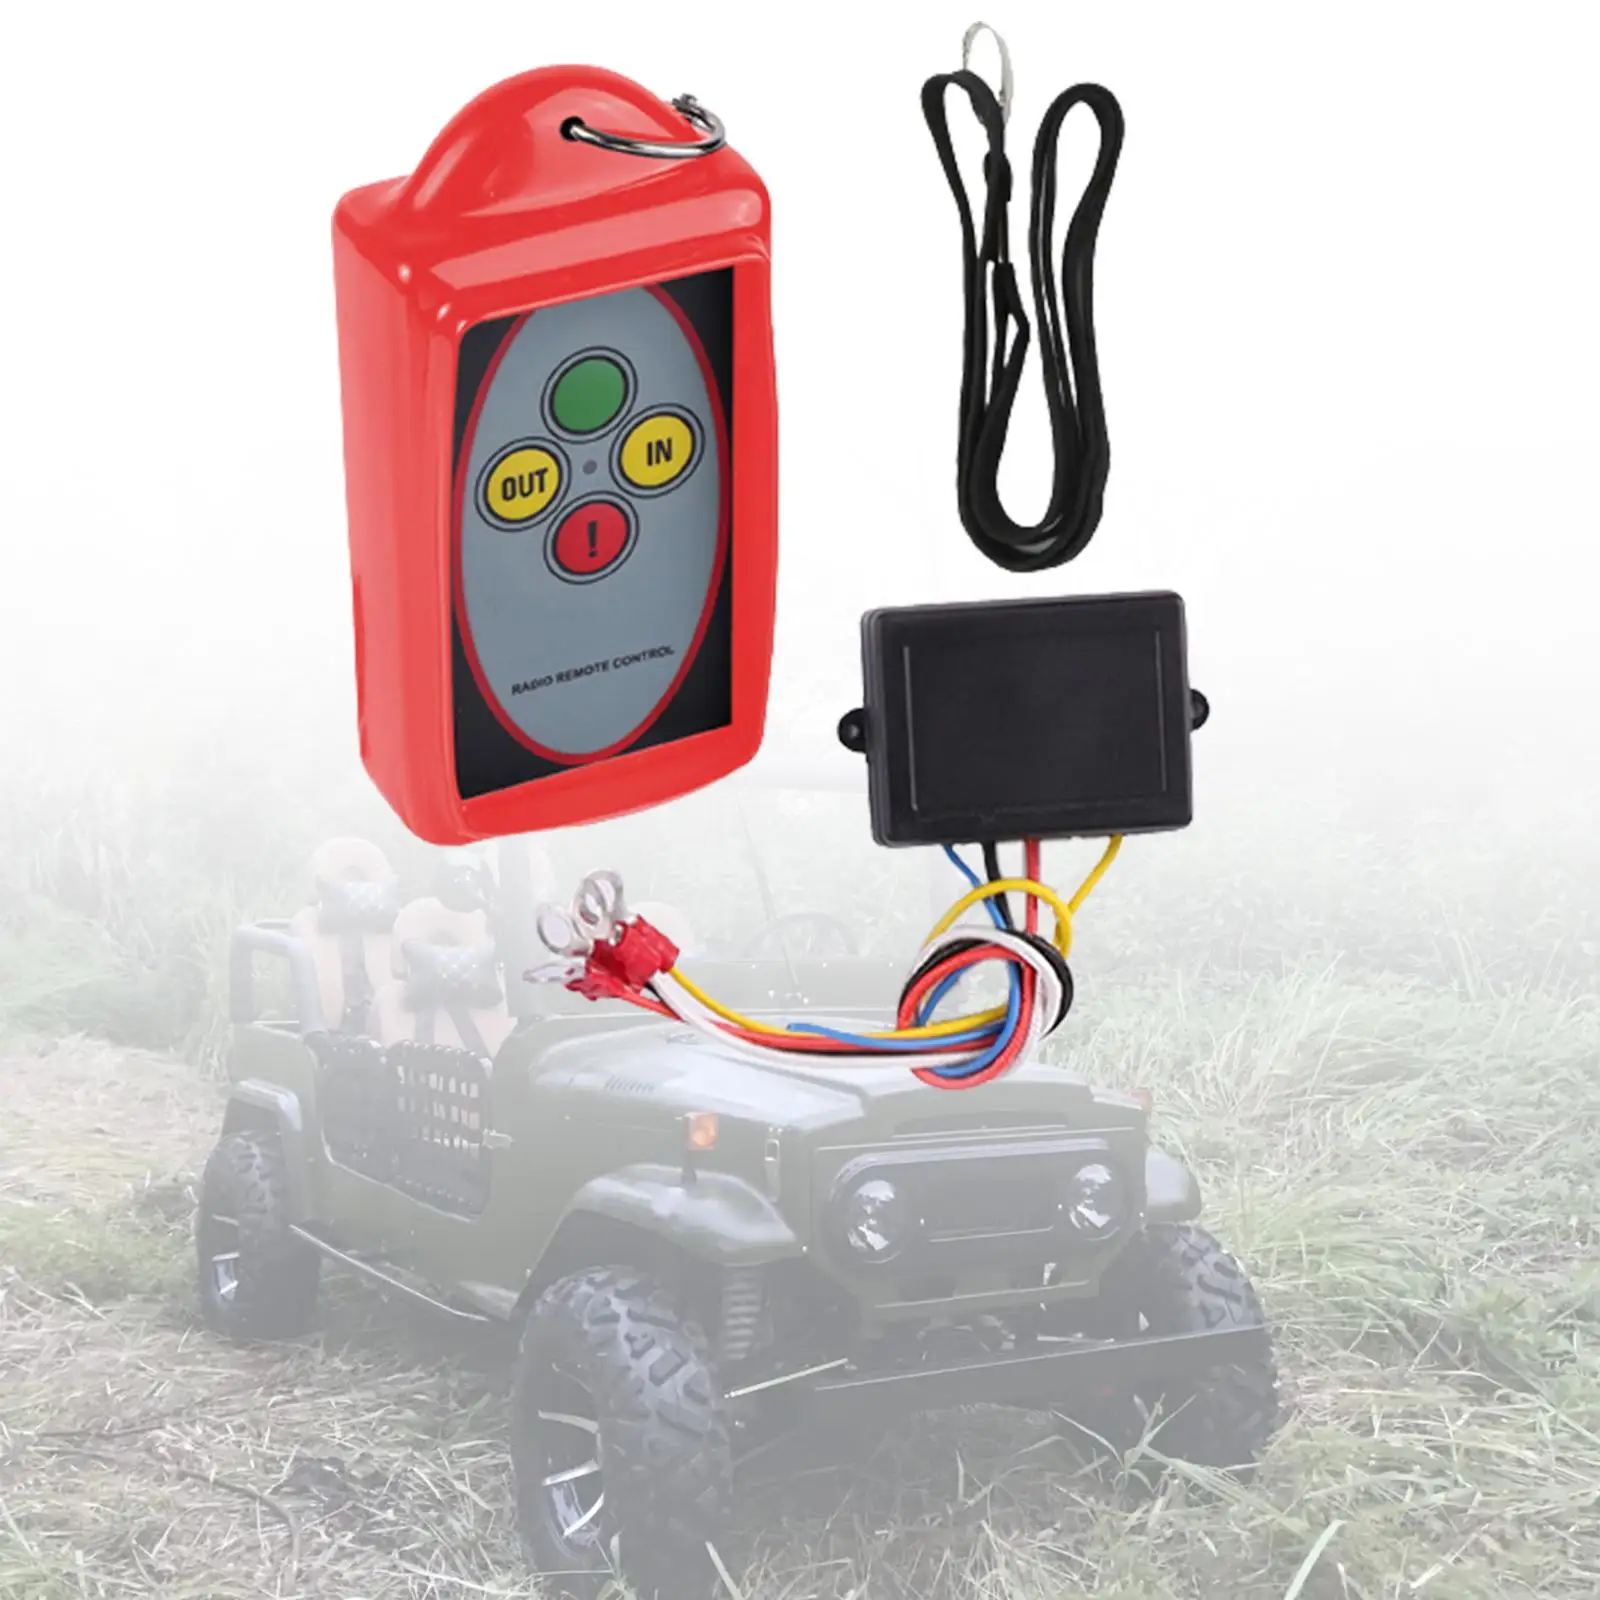 Wireless Winch Remote Control Kit Spare Parts for Truck Car Vehicle